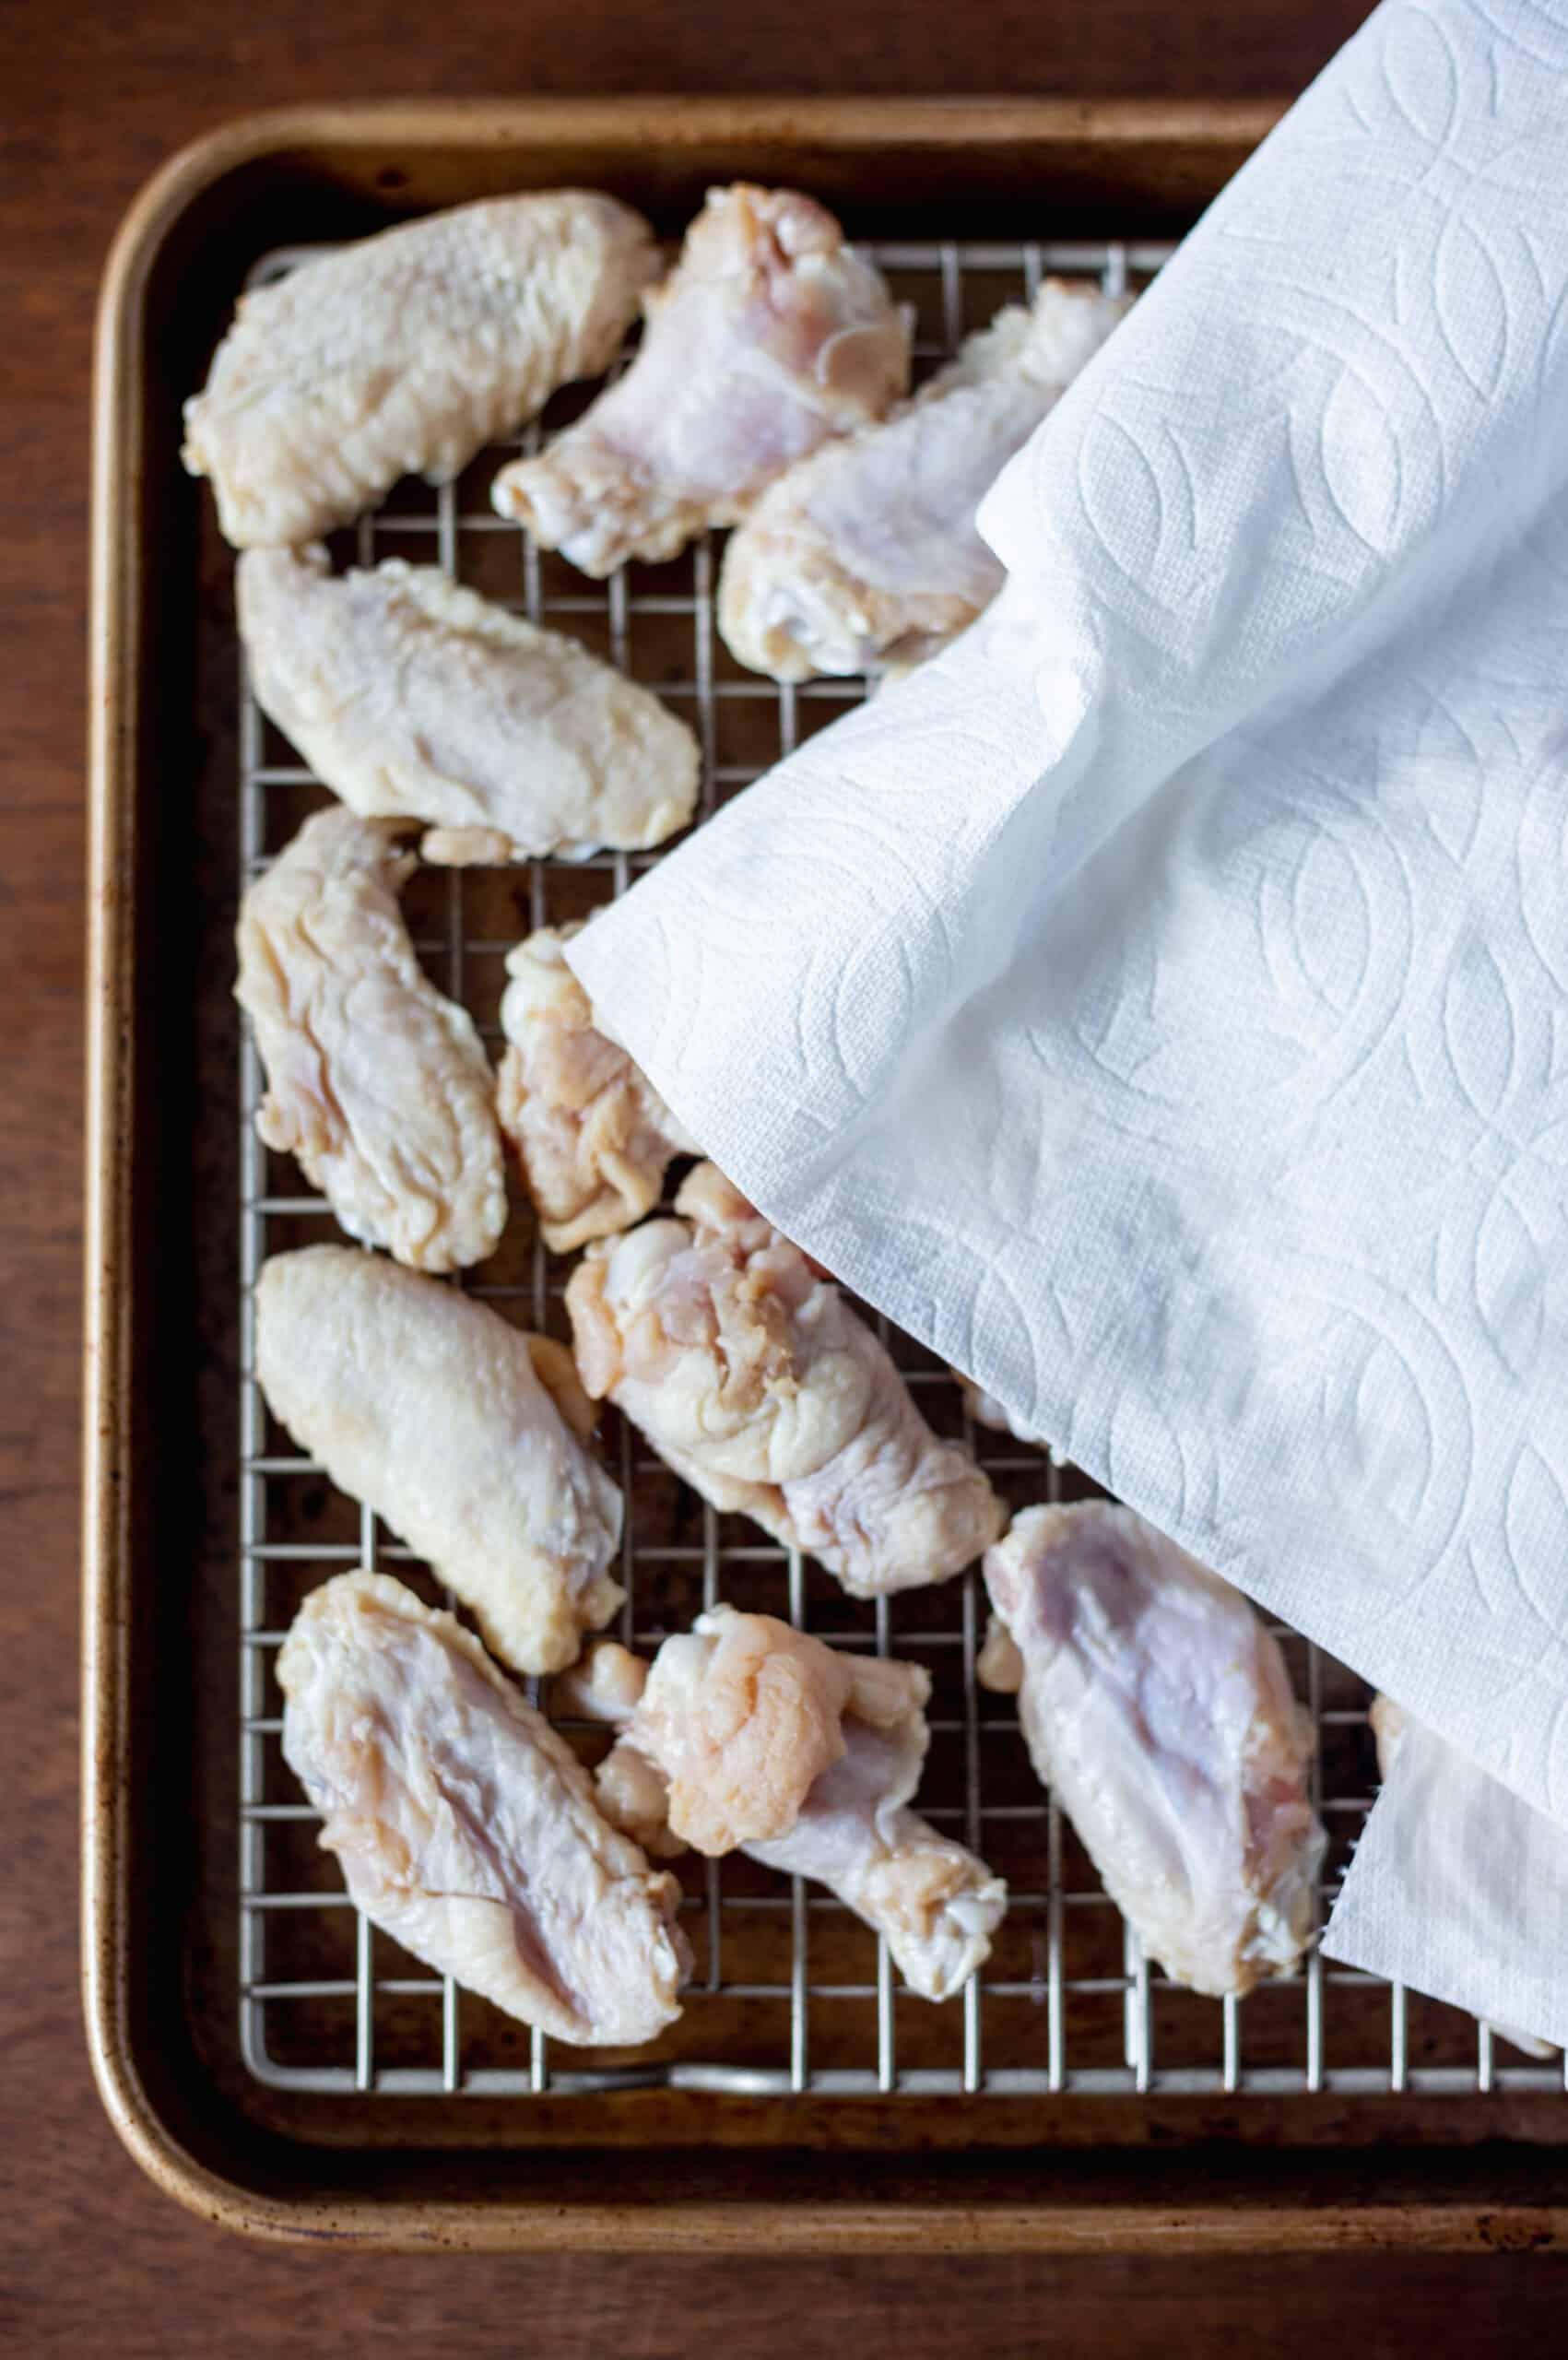 Chicken wings being dried with paper towel on a sheet pan